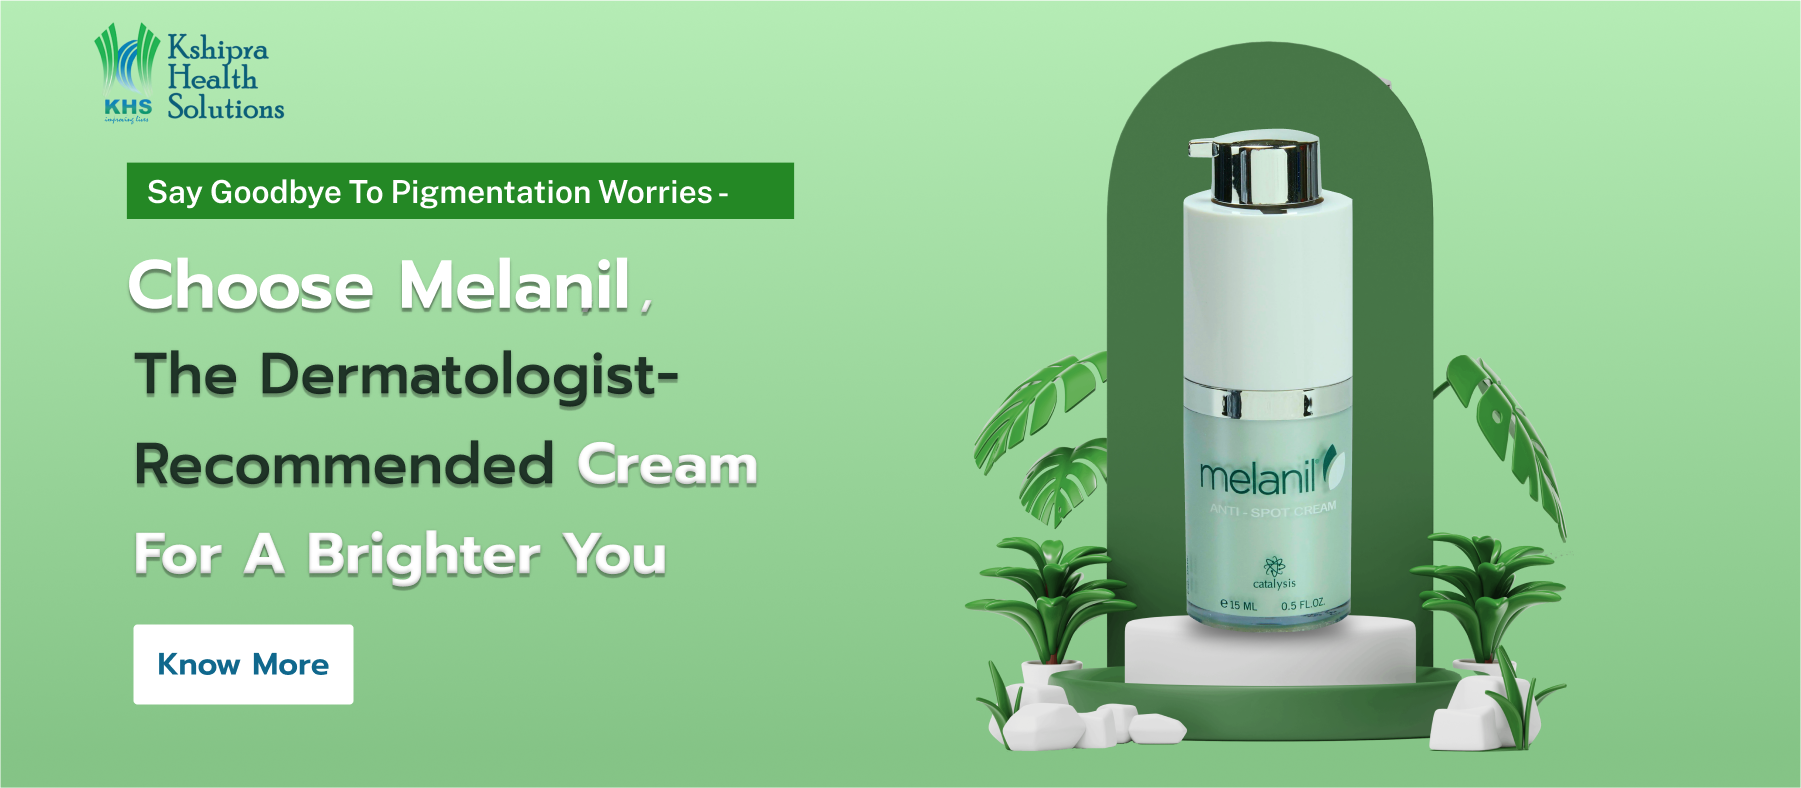 dermatologist recommended cream for pigmentation in india